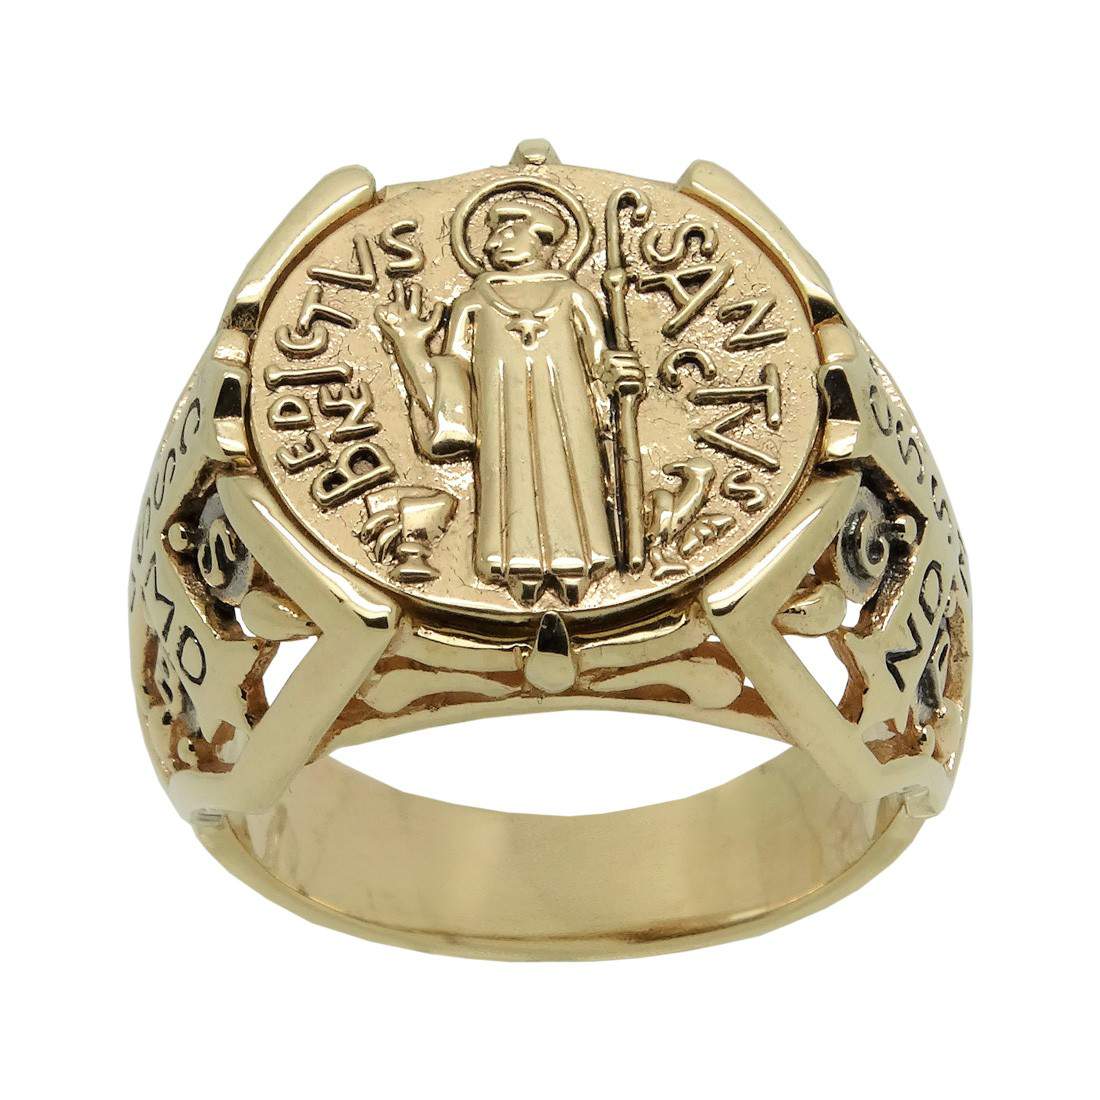 14K Gold Pope Joannes Paulus Ring, Religious Catholic Man Rings, St Joannes  Paulus II Redemptionis 1983 Medal, Best Gifts for Father's Day - Etsy